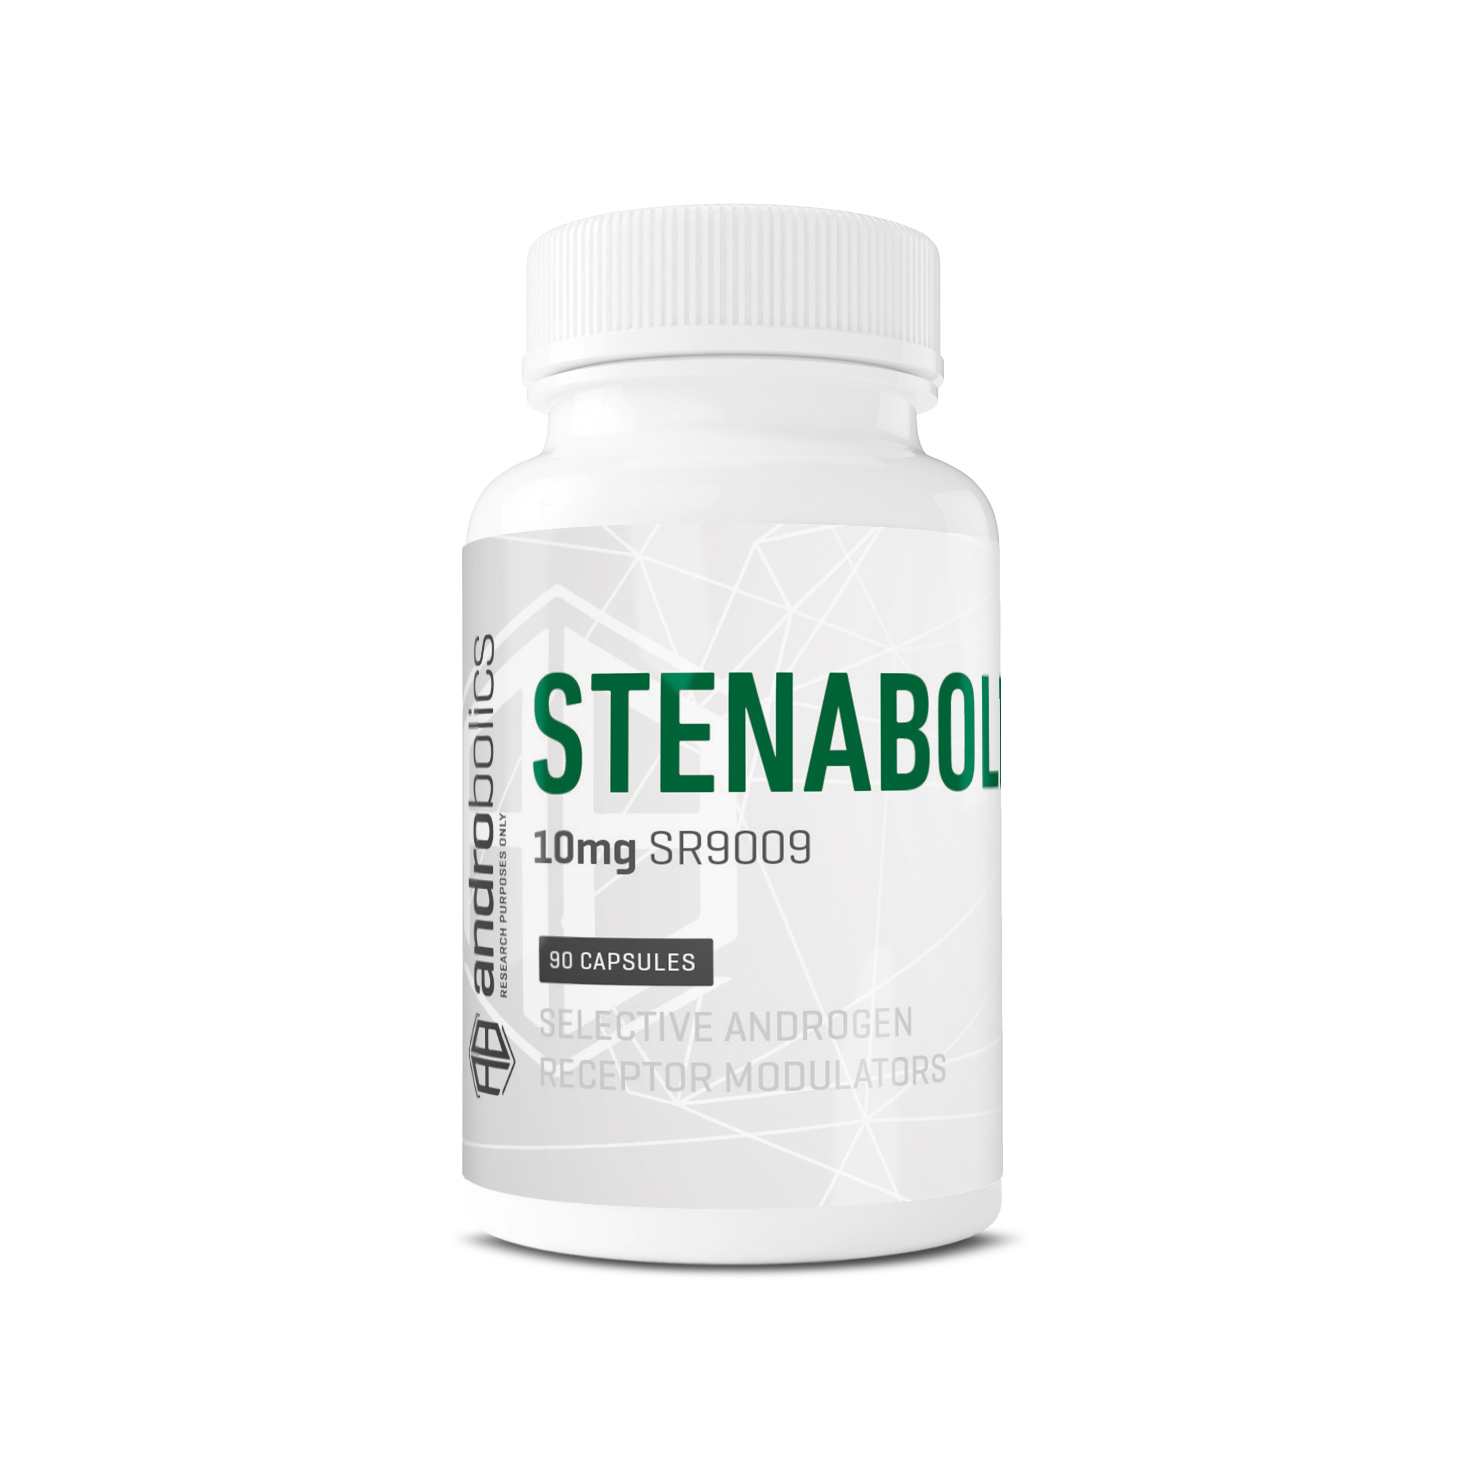 SR9009 Canada - Bottle of Stenabolic SR9009 with 90 capsules of 10mg